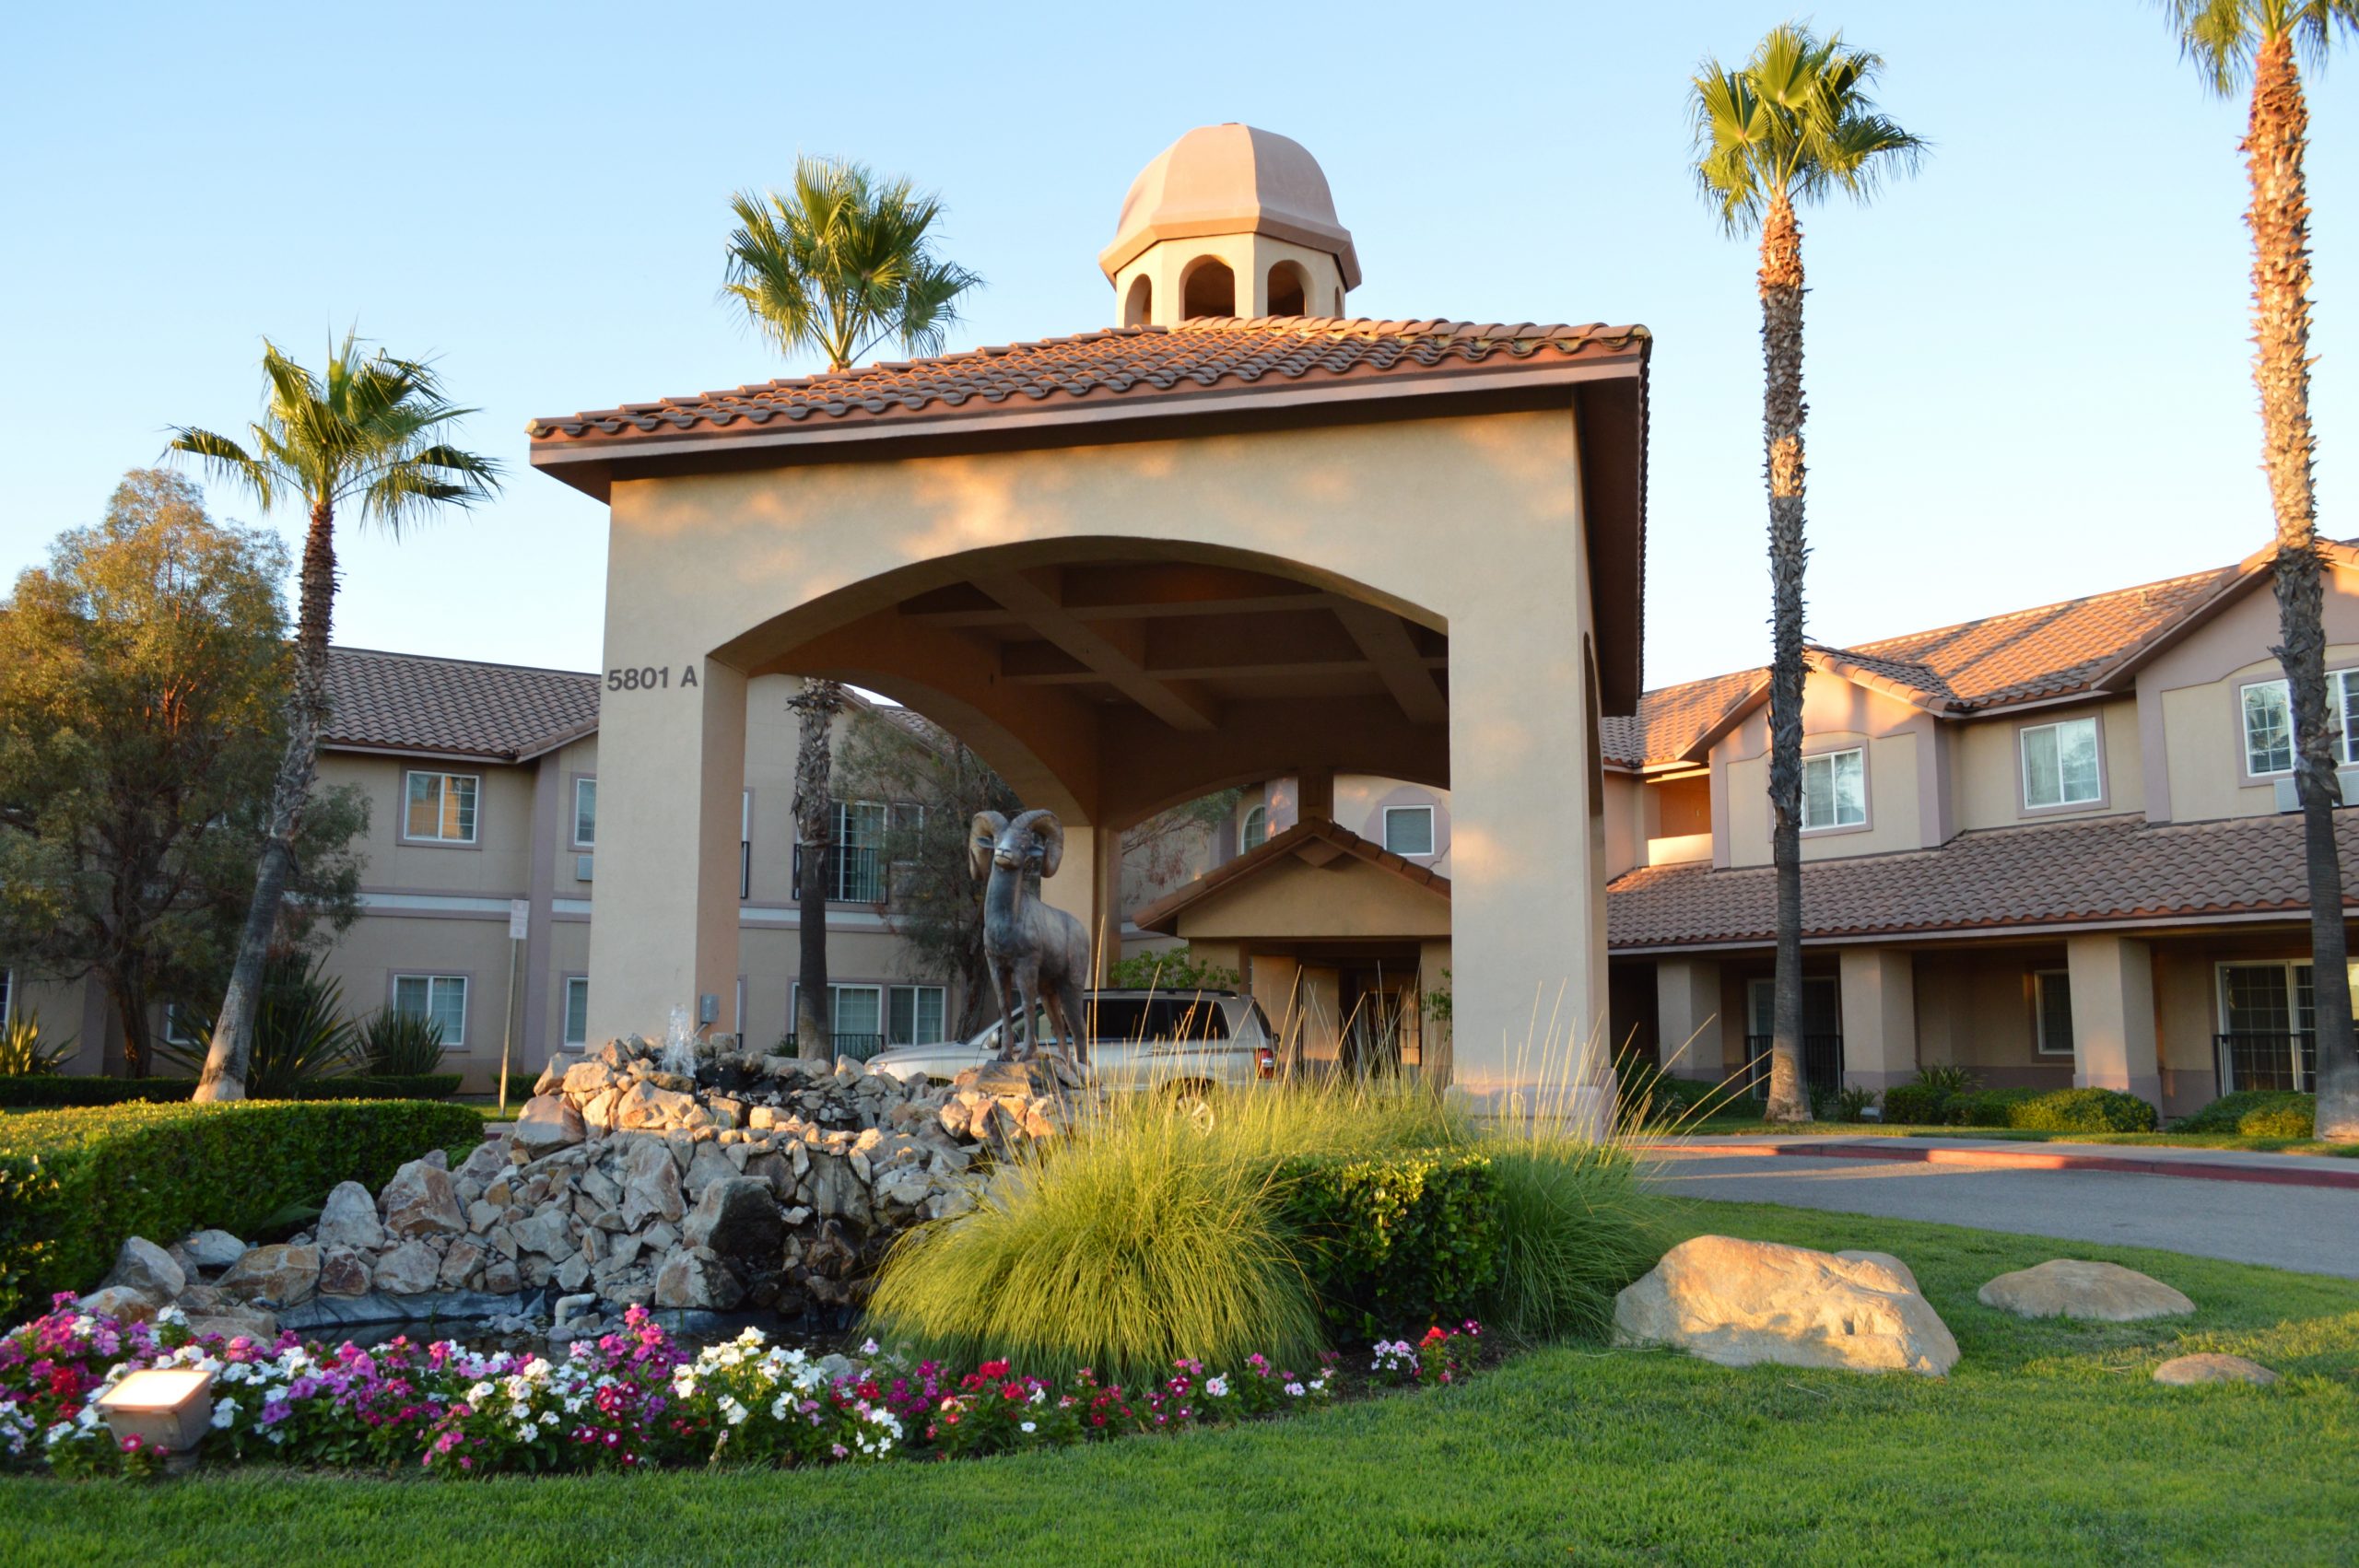 The Lakes Assisted Living and Memory Care